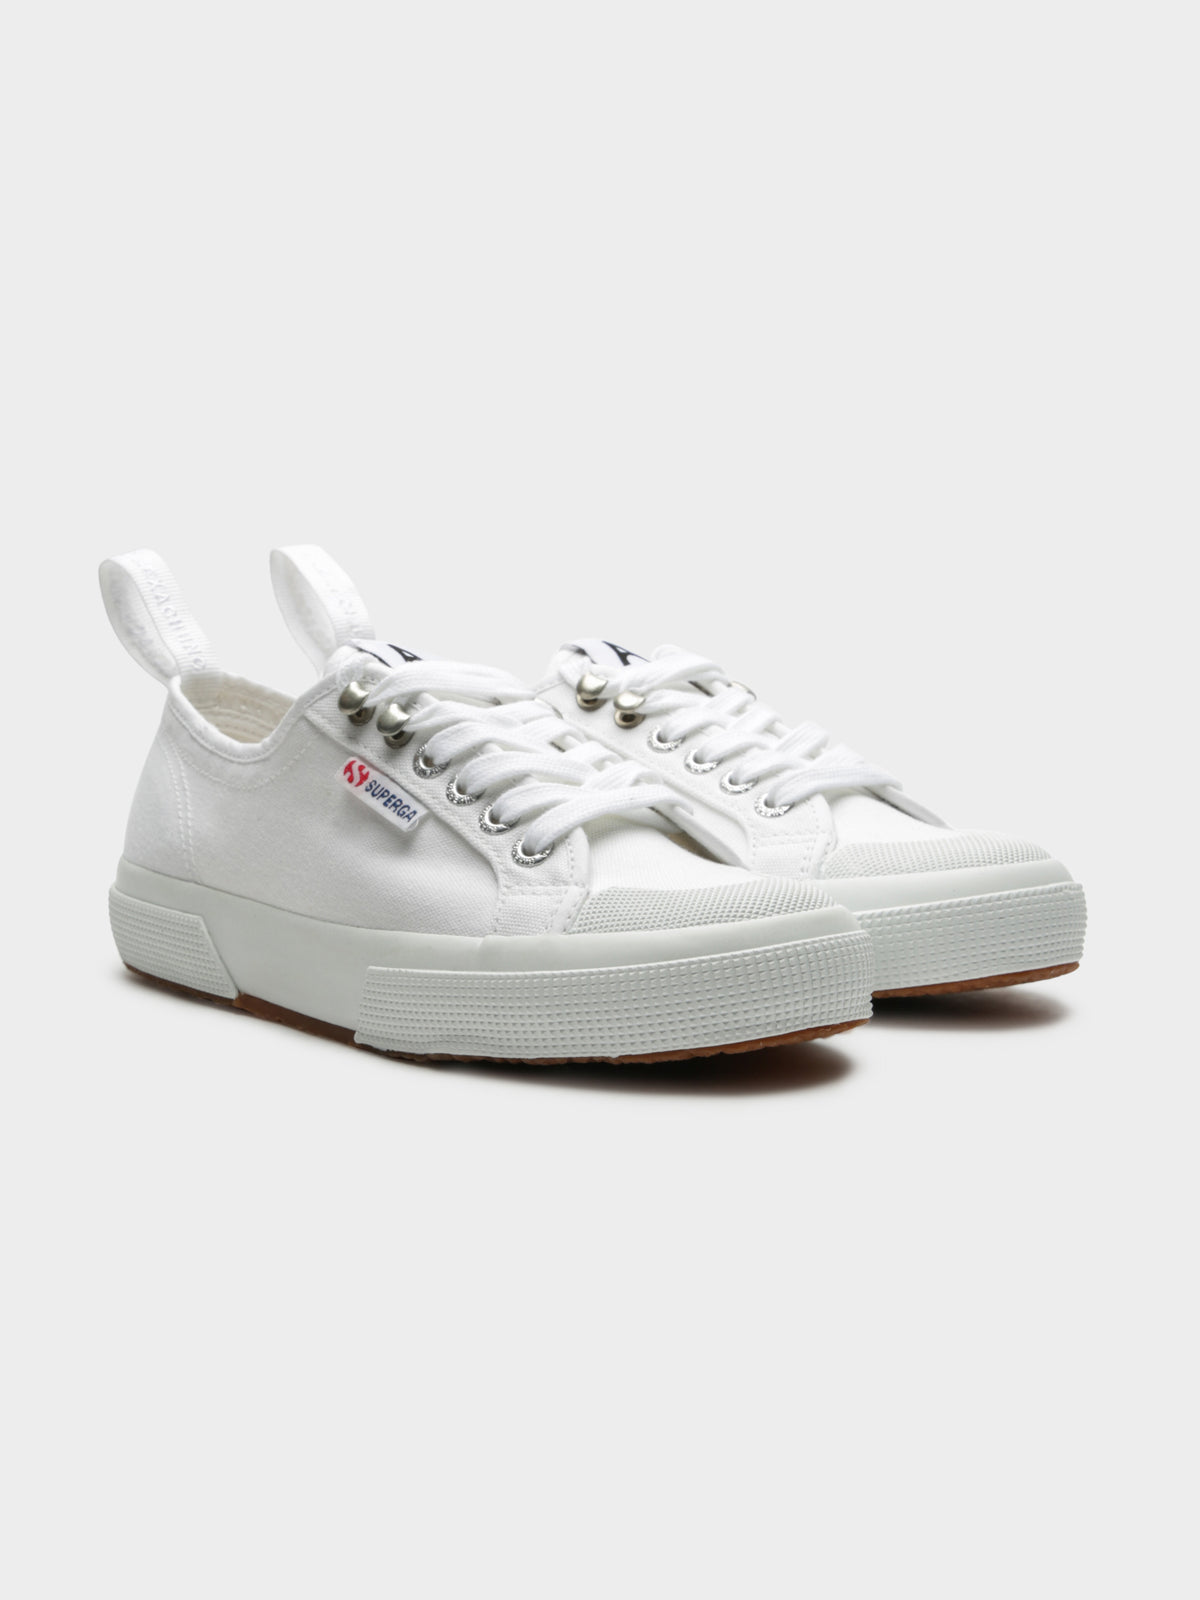 Alexa Chung Cot Hook Lace-Up Sneakers in White